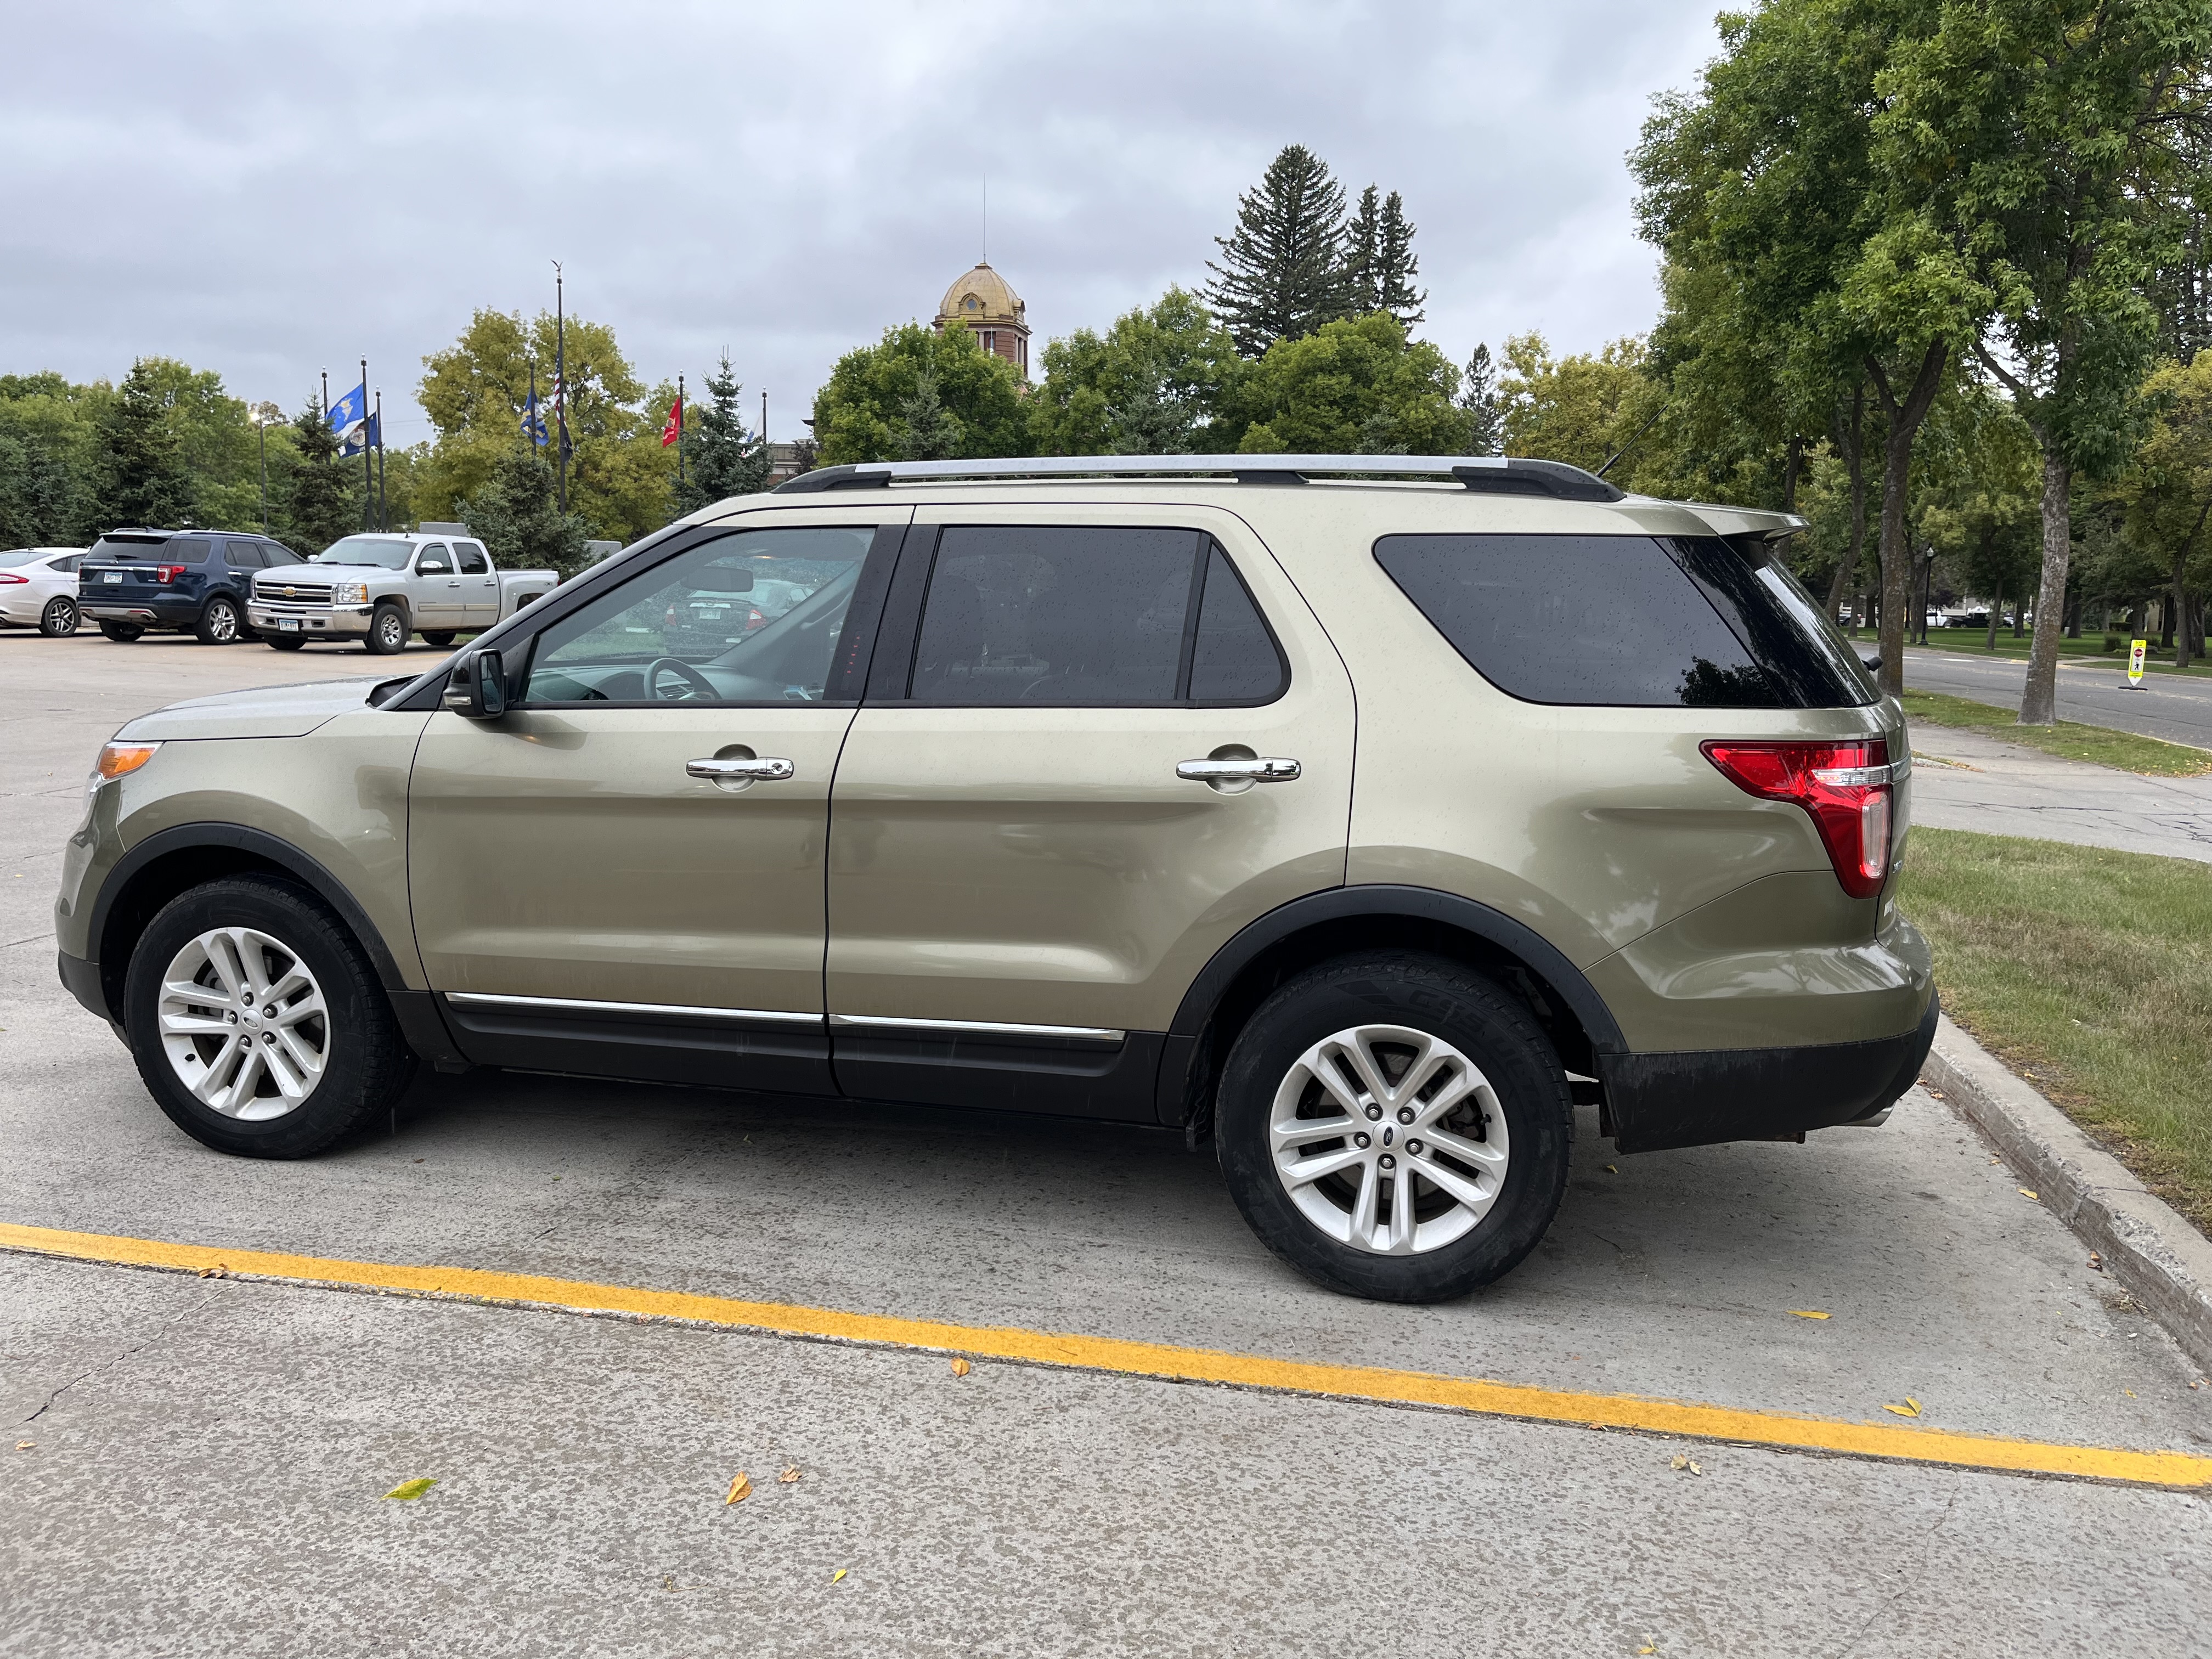 Side view of Ford Explorer for sale.